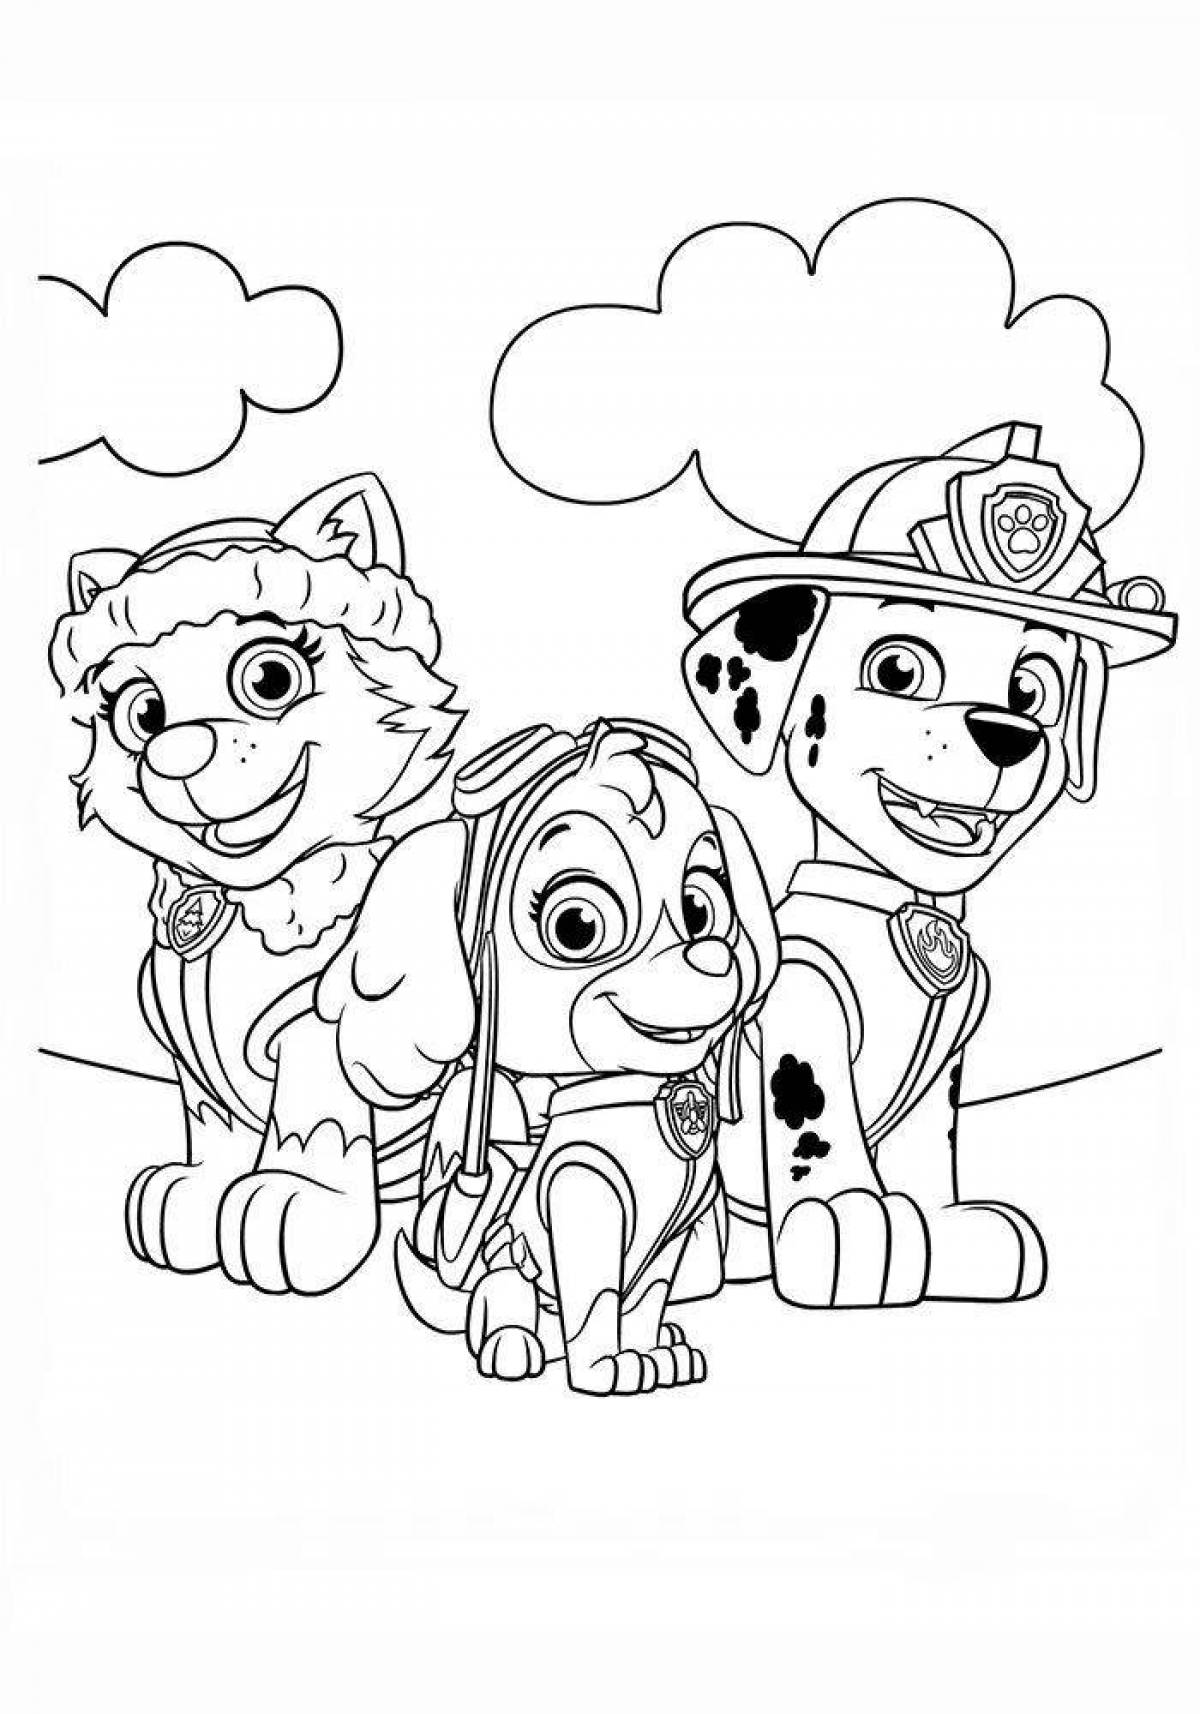 Exciting paw patrol baby coloring book